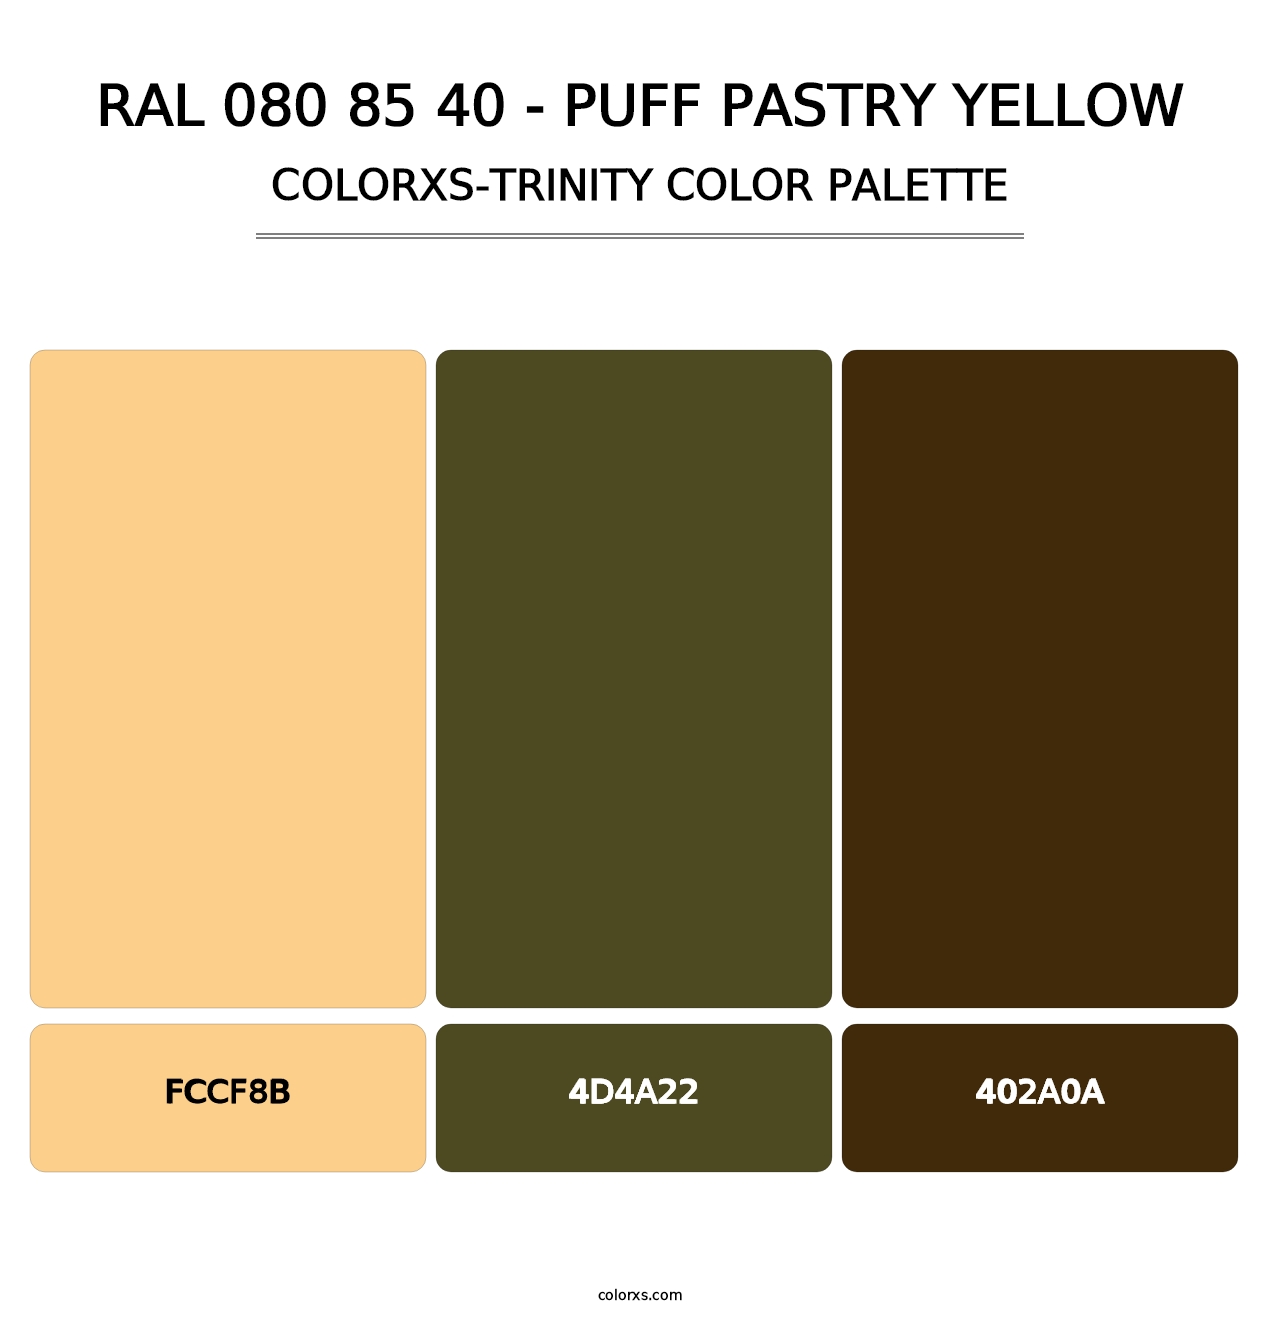 RAL 080 85 40 - Puff Pastry Yellow - Colorxs Trinity Palette